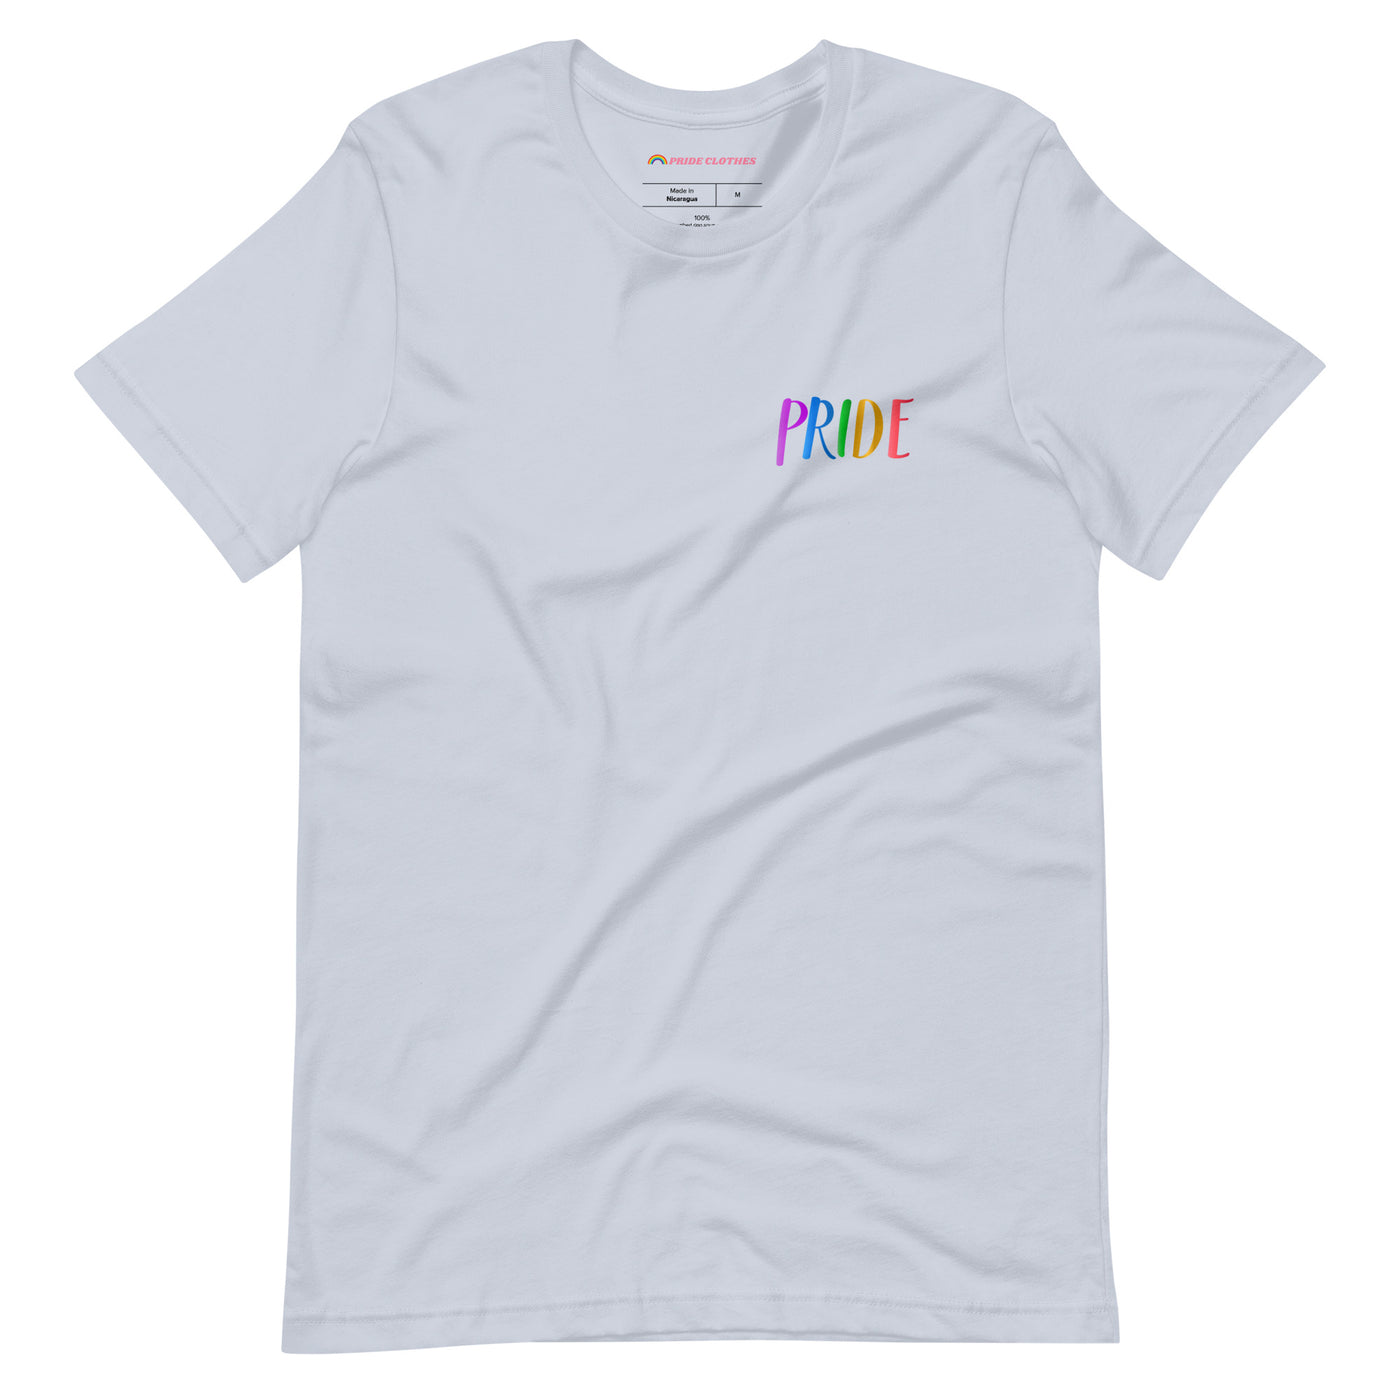 Pride Clothes - A Simple and Proud Gay Shirt for You - Light Blue